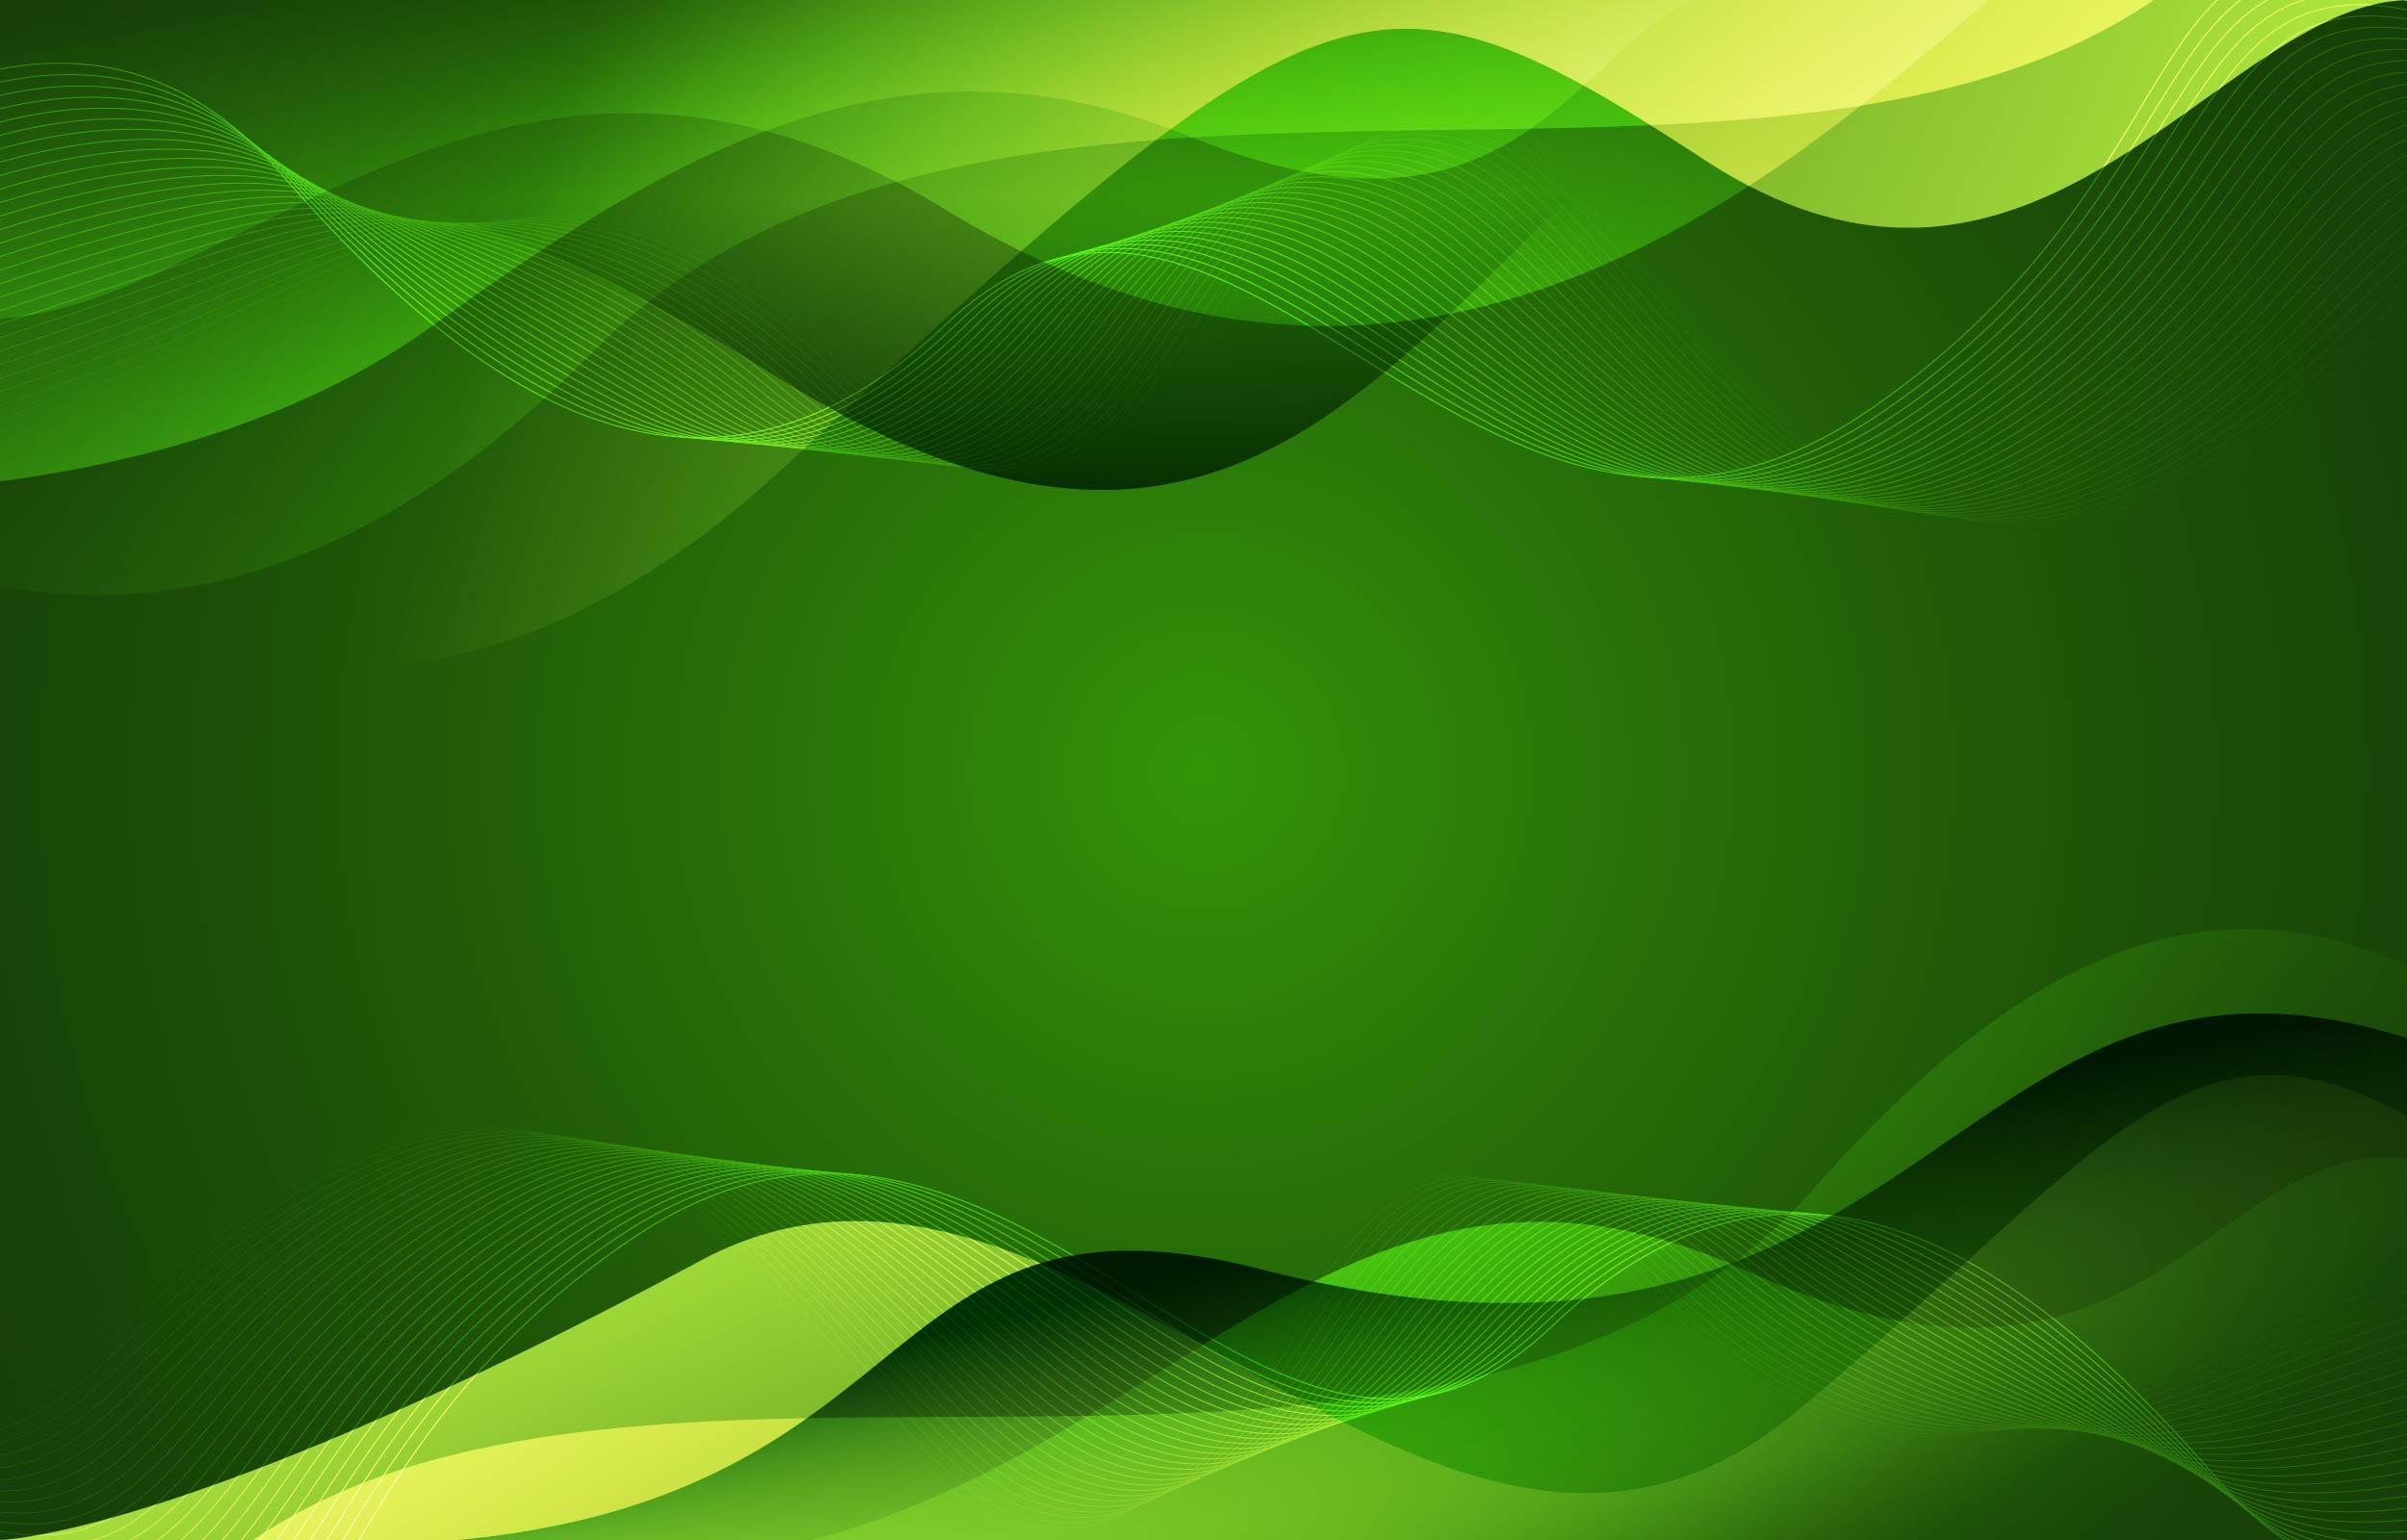 Free Vector Abstract Background With Green Leaves 04  TitanUI